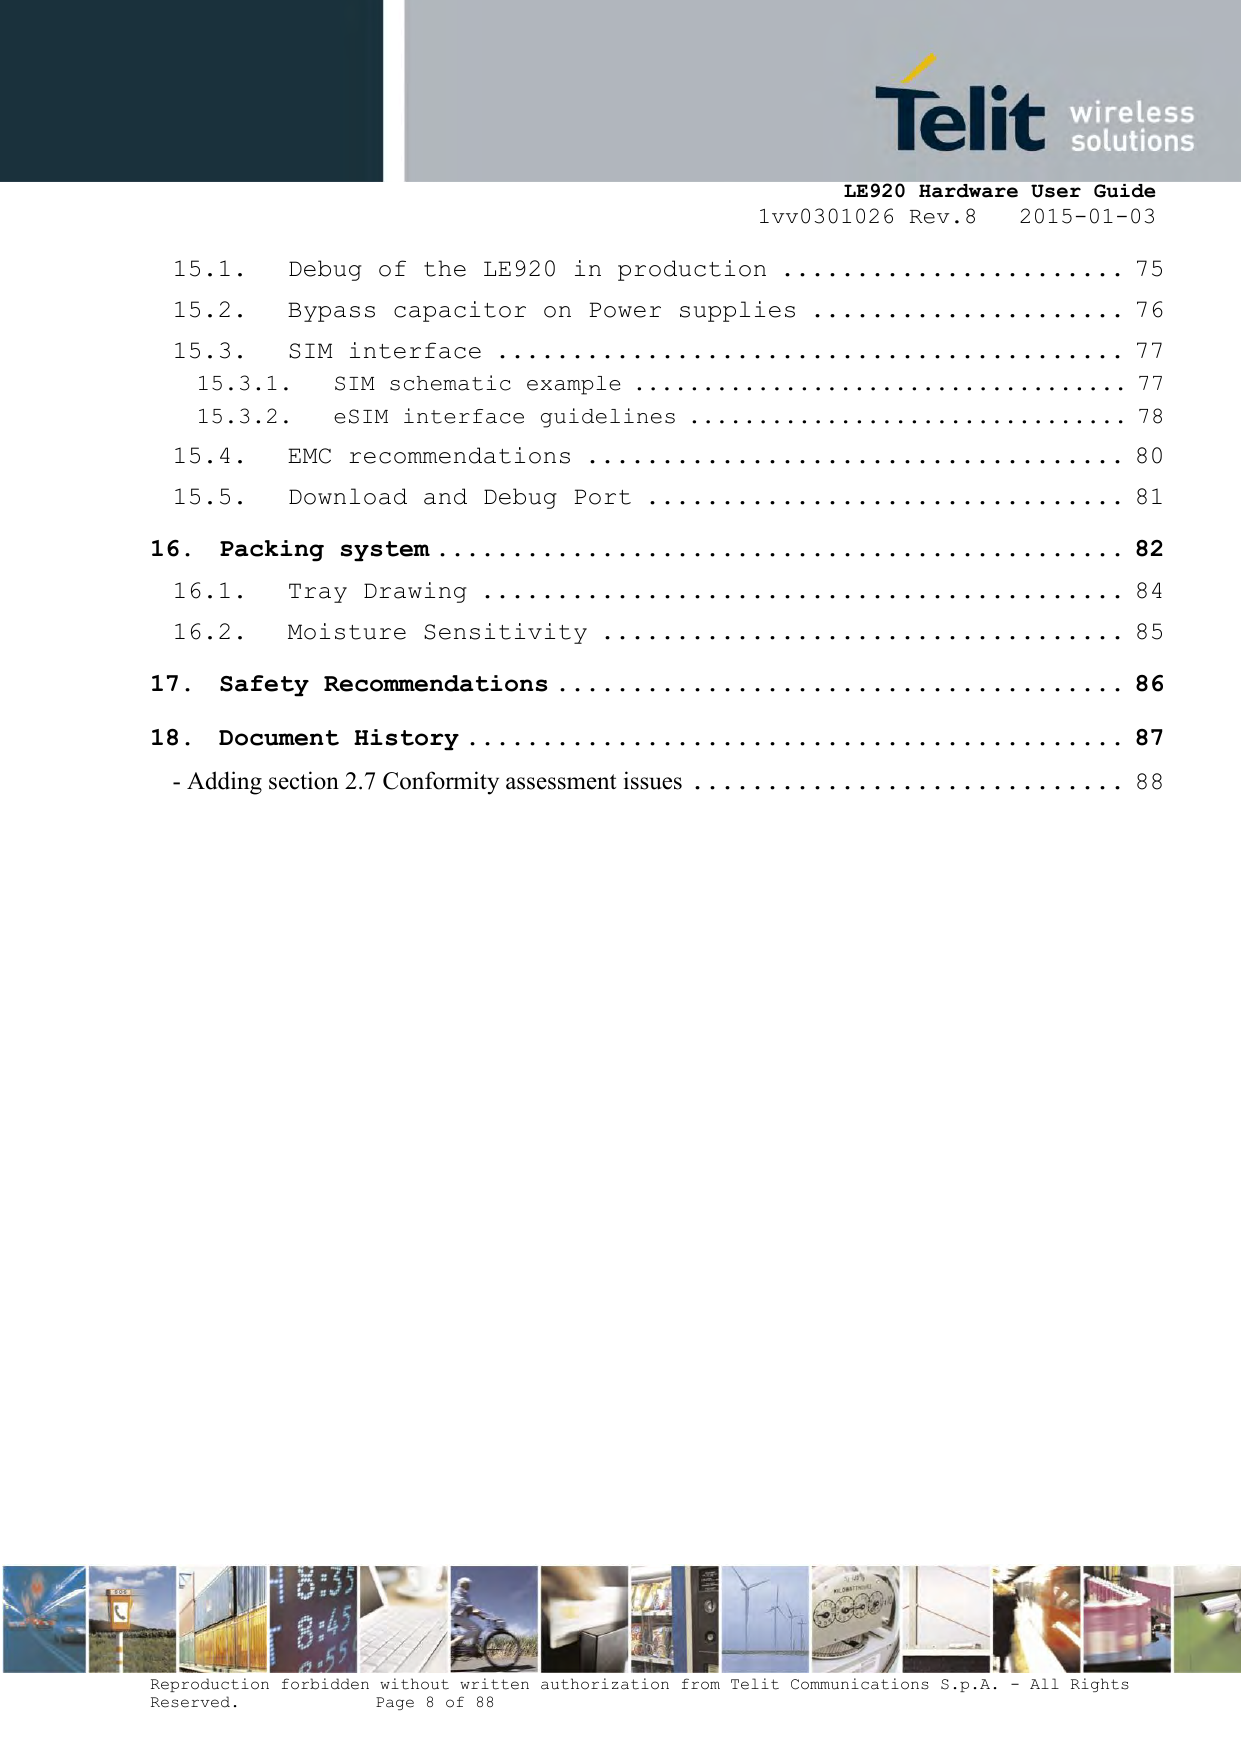     LE920 Hardware User Guide 1vv0301026 Rev.8   2015-01-03 Reproduction forbidden without written authorization from Telit Communications S.p.A. - All Rights Reserved.    Page 8 of 88  15.1. Debug of the LE920 in production ....................... 75 15.2. Bypass capacitor on Power supplies ..................... 76 15.3. SIM interface .......................................... 77 15.3.1. SIM schematic example .................................... 77 15.3.2. eSIM interface guidelines ................................ 78 15.4. EMC recommendations .................................... 80 15.5. Download and Debug Port ................................ 81 16. Packing system .............................................. 82 16.1. Tray Drawing ........................................... 84 16.2. Moisture Sensitivity ................................... 85 17. Safety Recommendations ...................................... 86 18. Document History ............................................ 87 - Adding section 2.7 Conformity assessment issues ............................. 88 